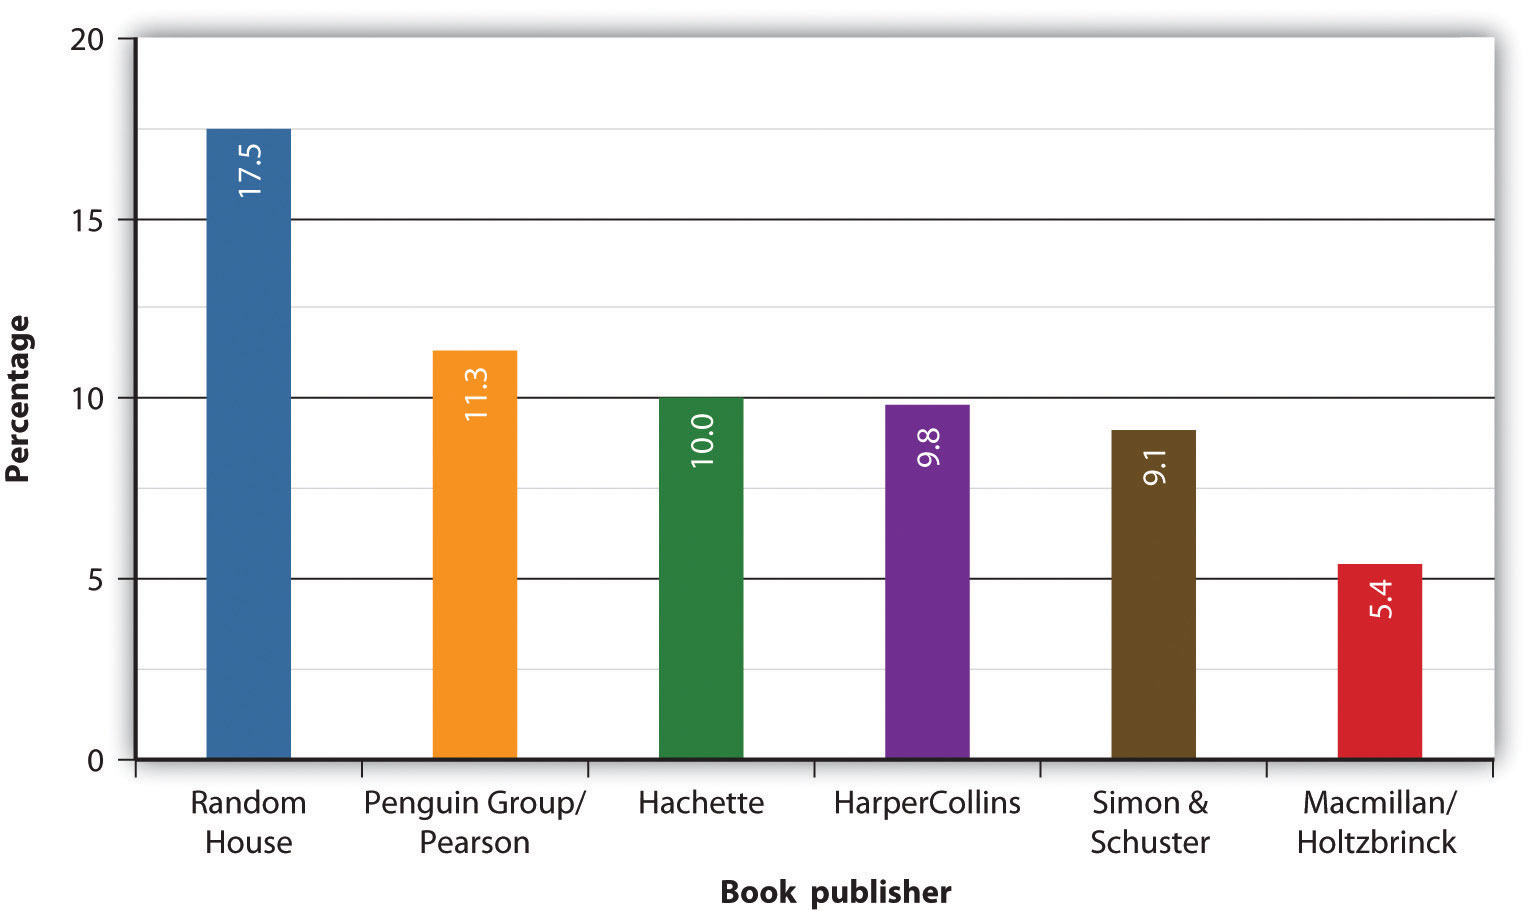 October 2015 – Apple, B&N, Kobo, and Google: a look at the rest of the ebook market